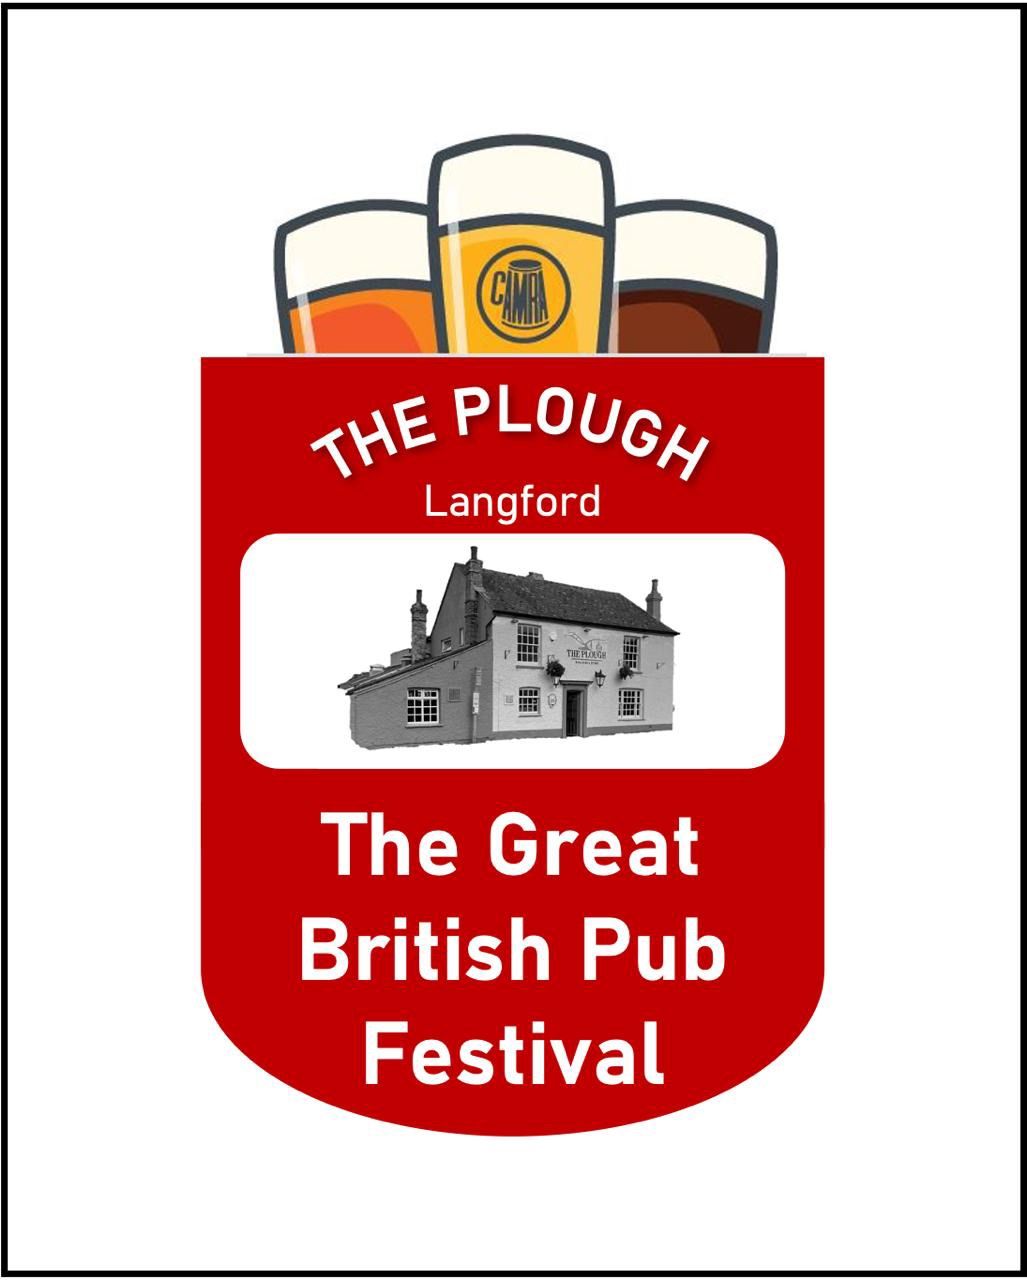 The Ploughs 3rd Annual Beer and Cider Festival